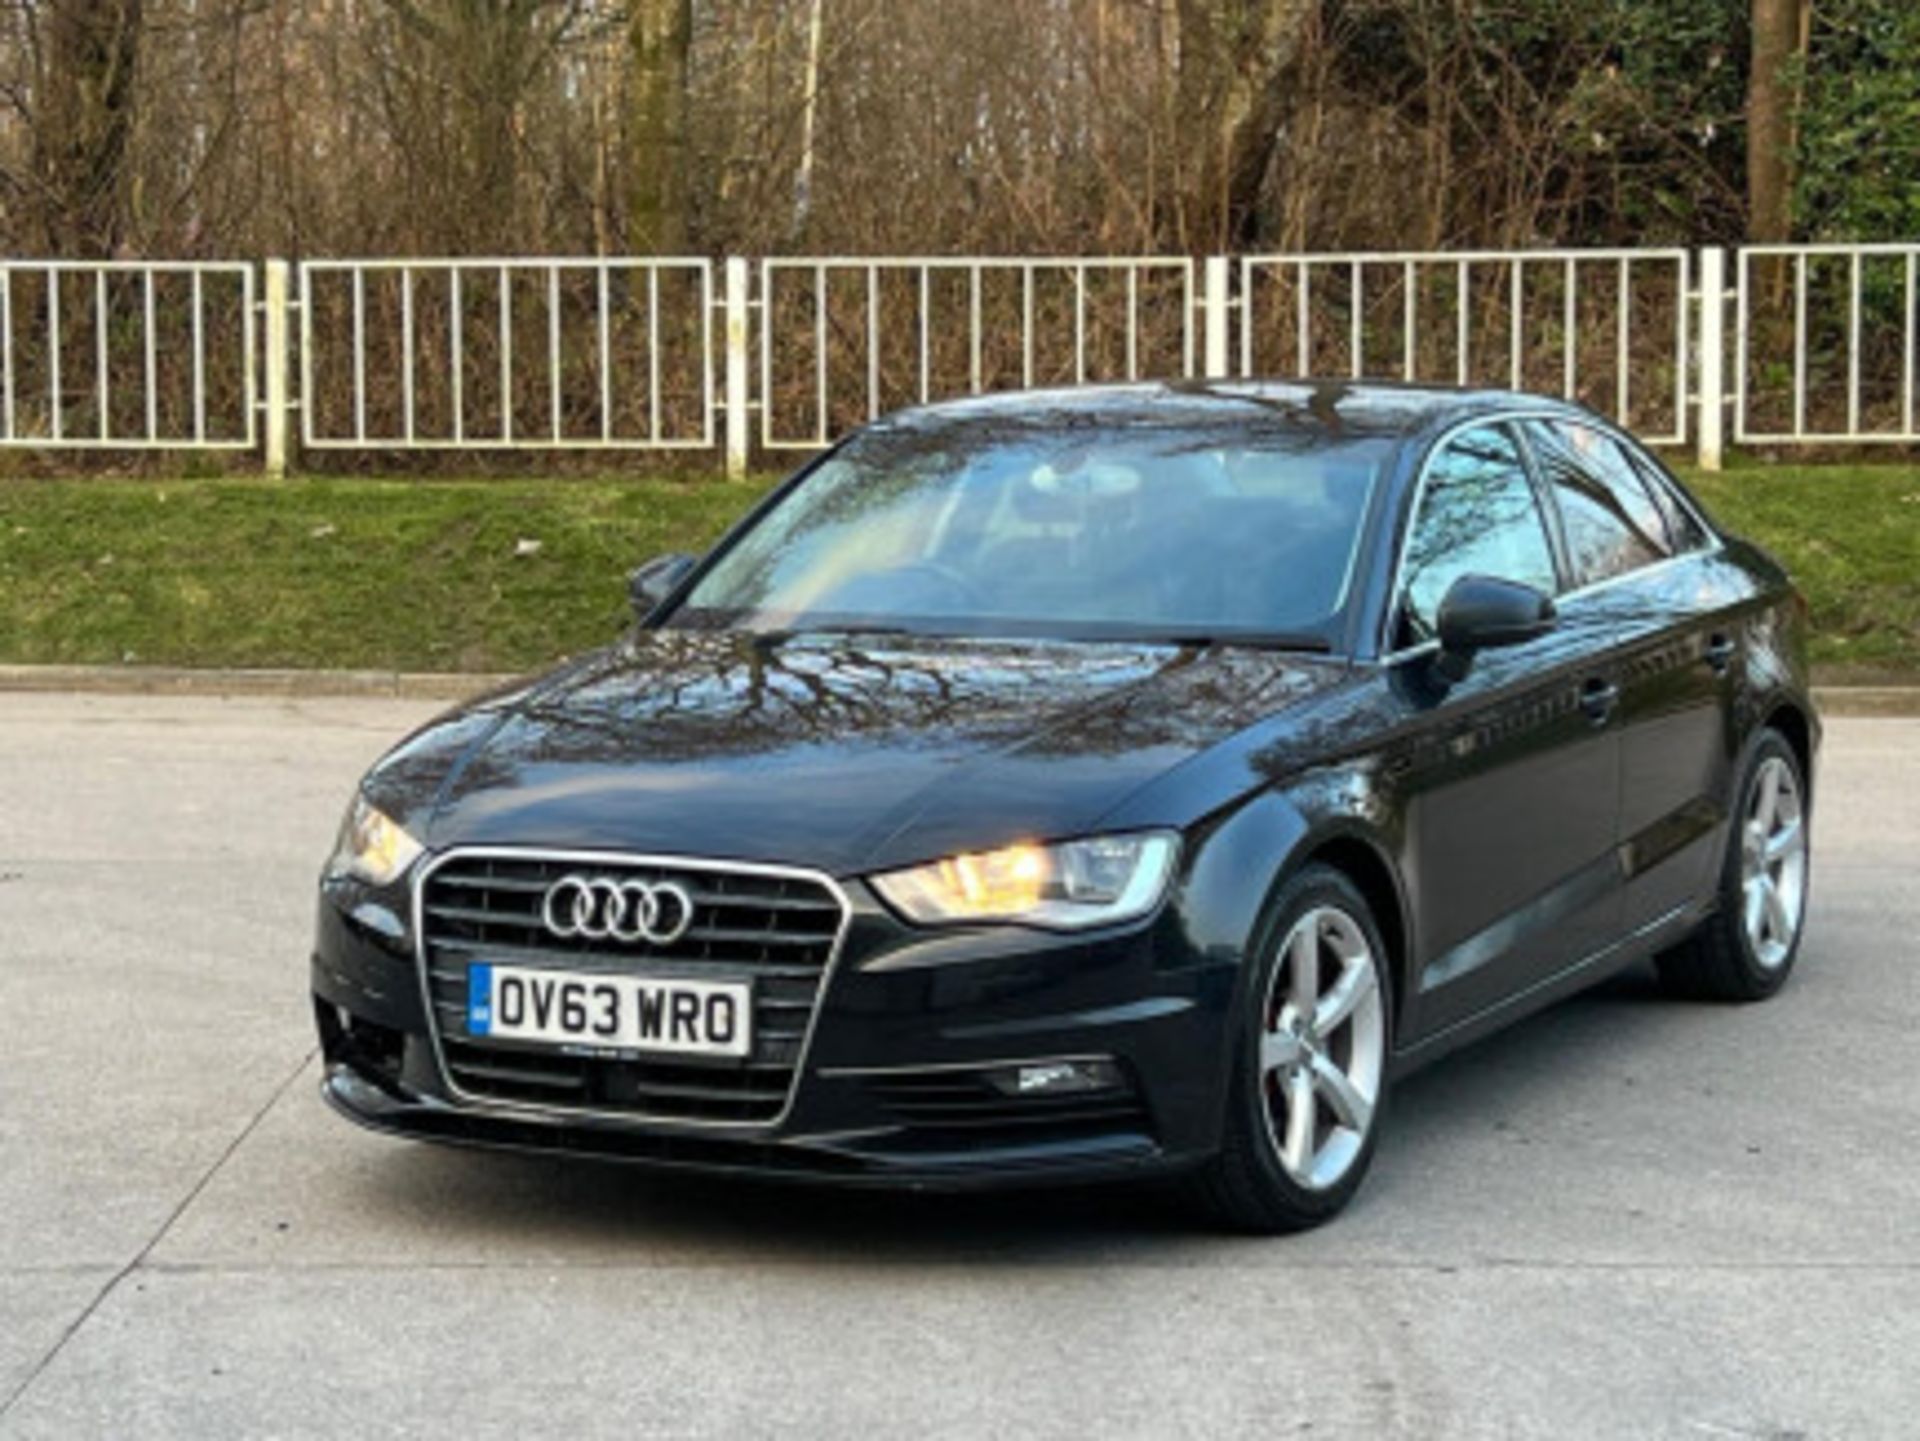 AUDI A3 2.0TDI SPORTBACK - STYLE, PERFORMANCE, AND COMFORT COMBINED >>--NO VAT ON HAMMER--<< - Image 60 of 216